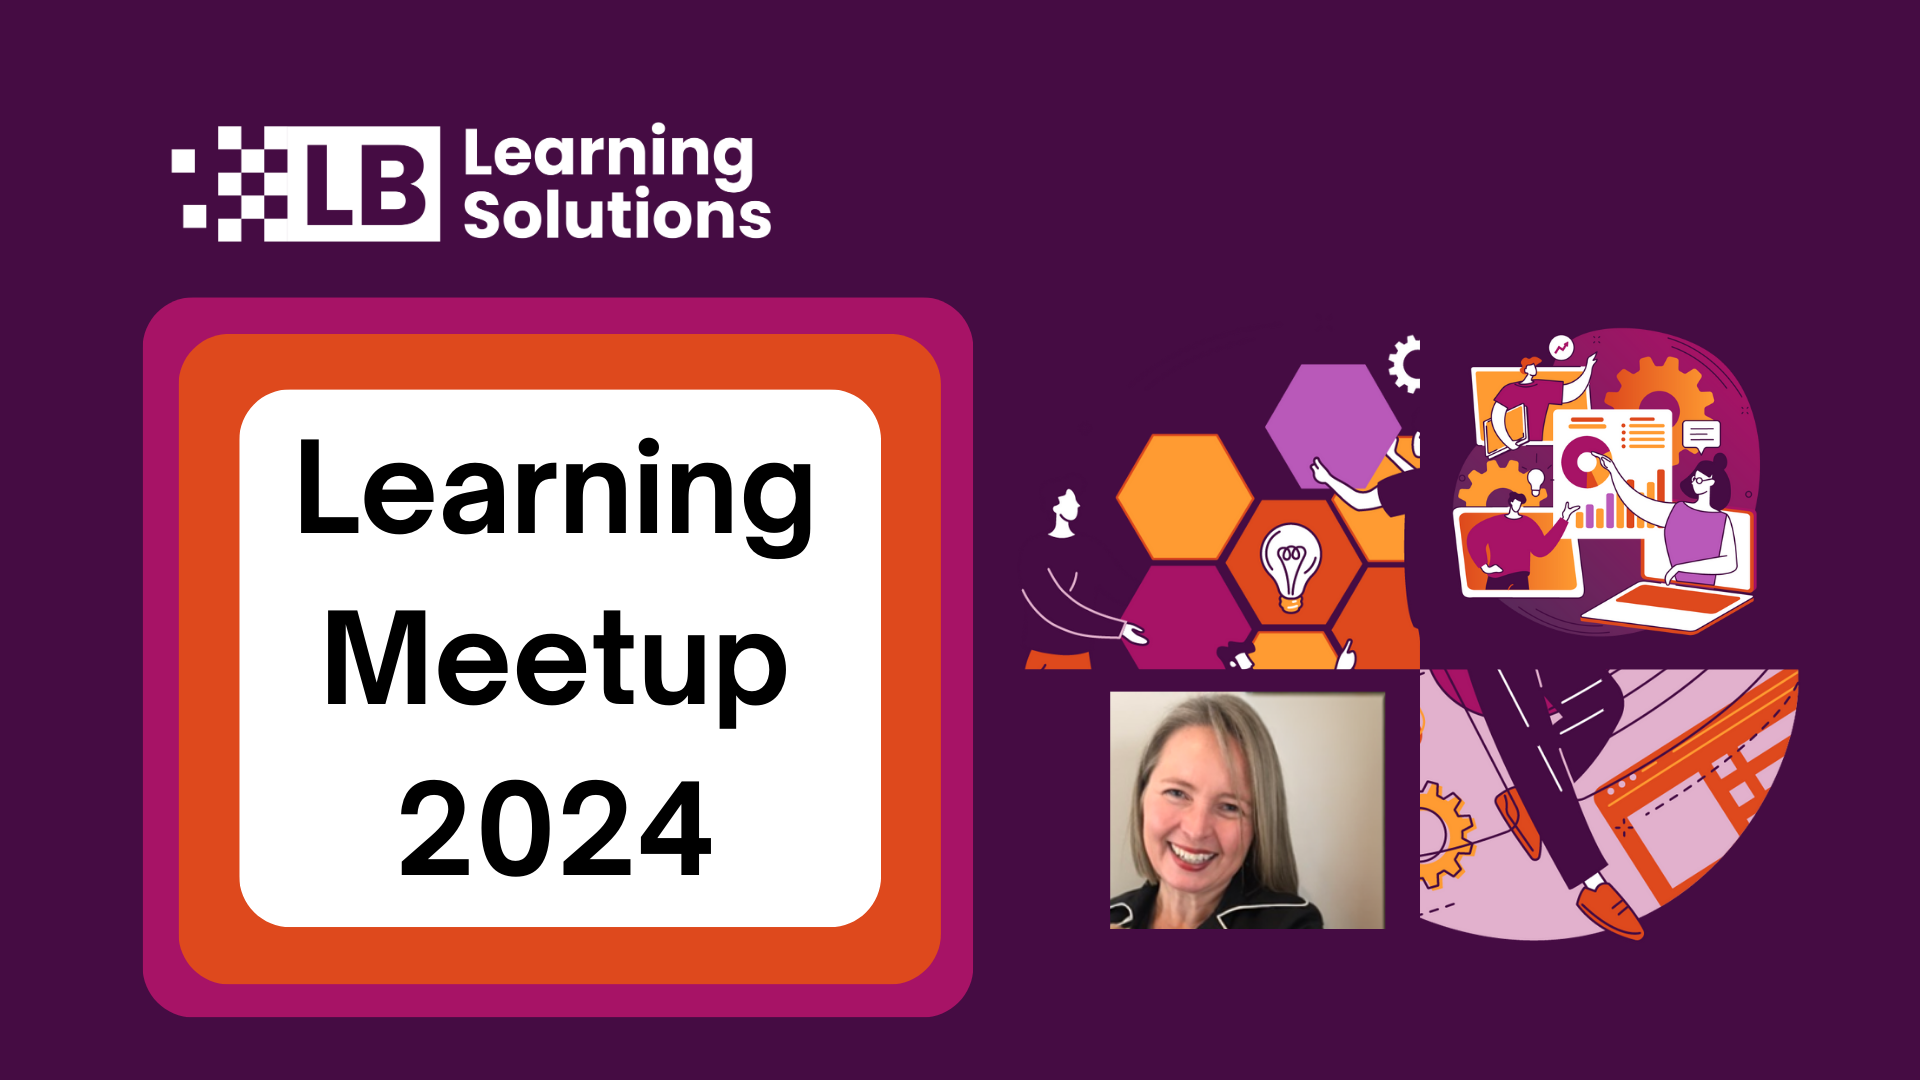 Learning meetup 2024 advertising banner